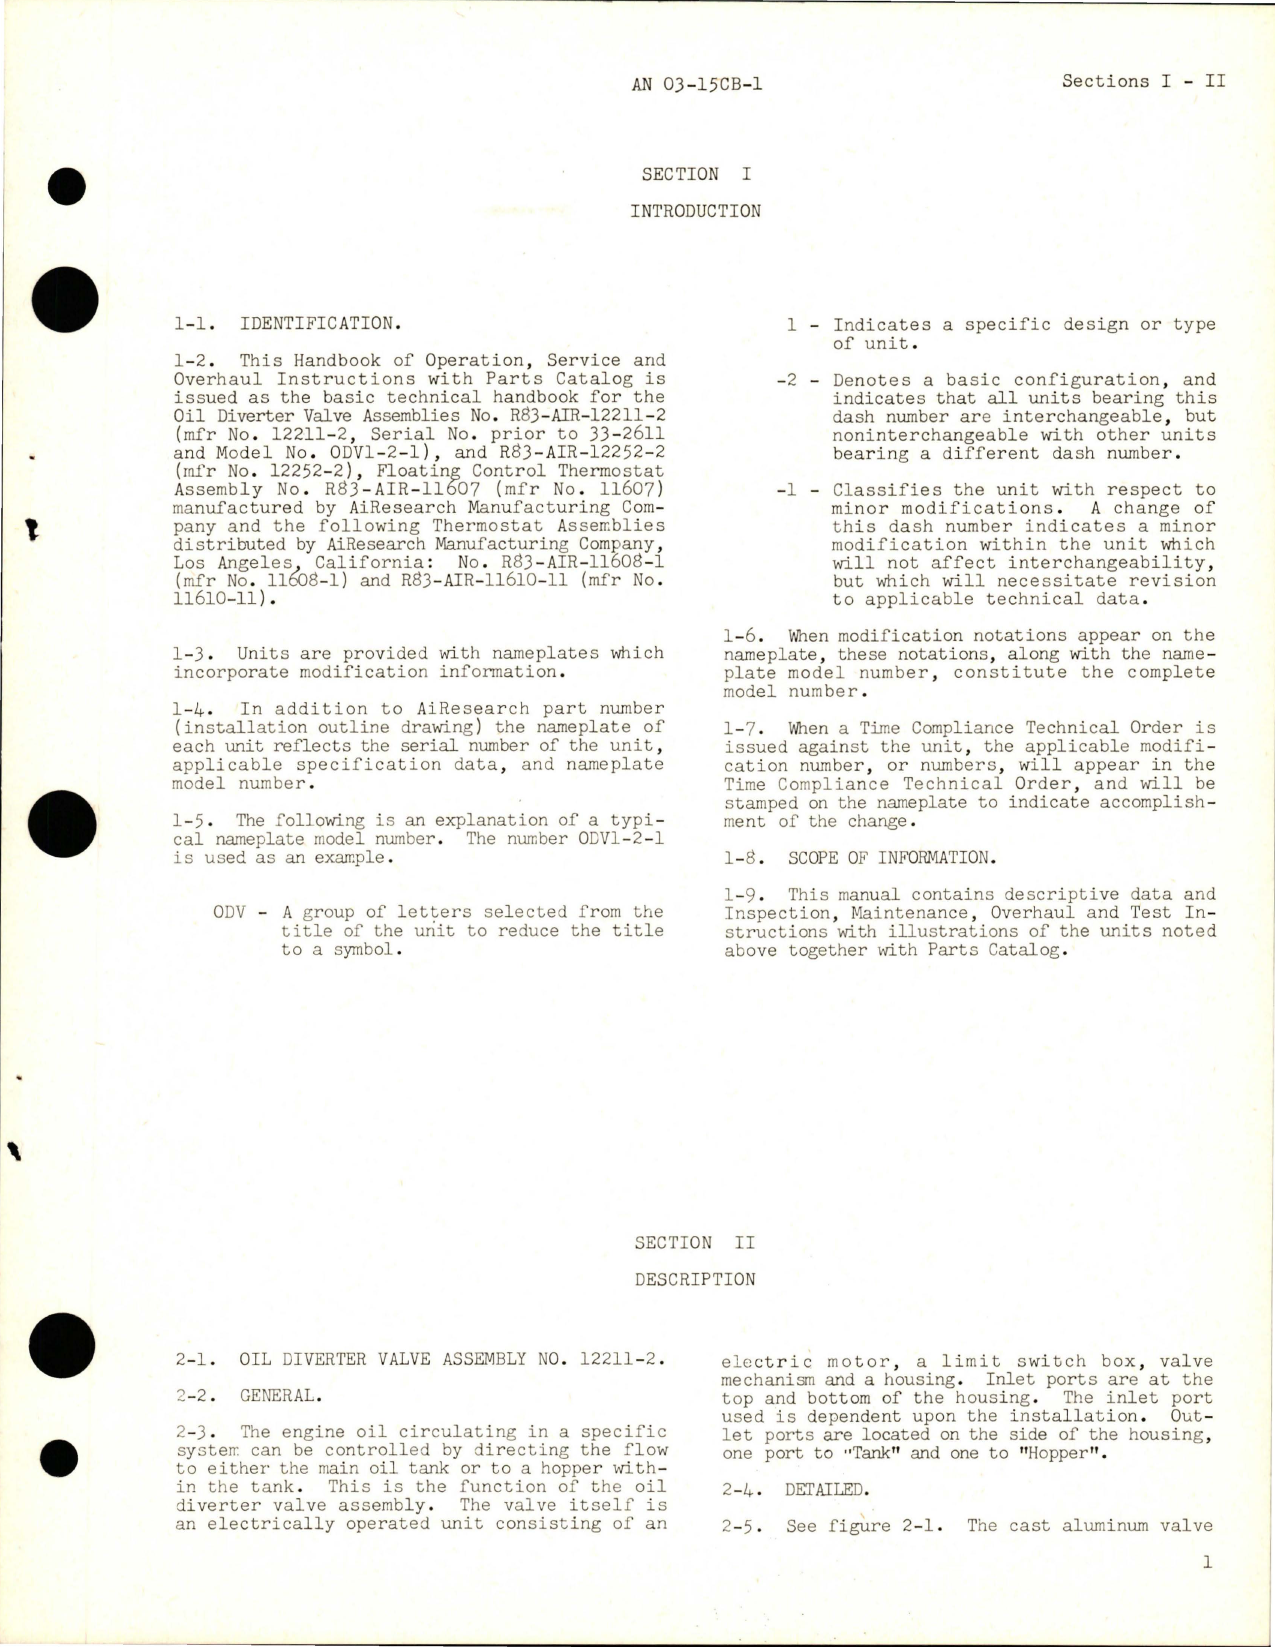 Sample page 9 from AirCorps Library document: Operation, Service and Overhaul Instructions for Oil Diverter Valve Assembly, Floating Control Thermostat Assembly and Thermostat Assembly